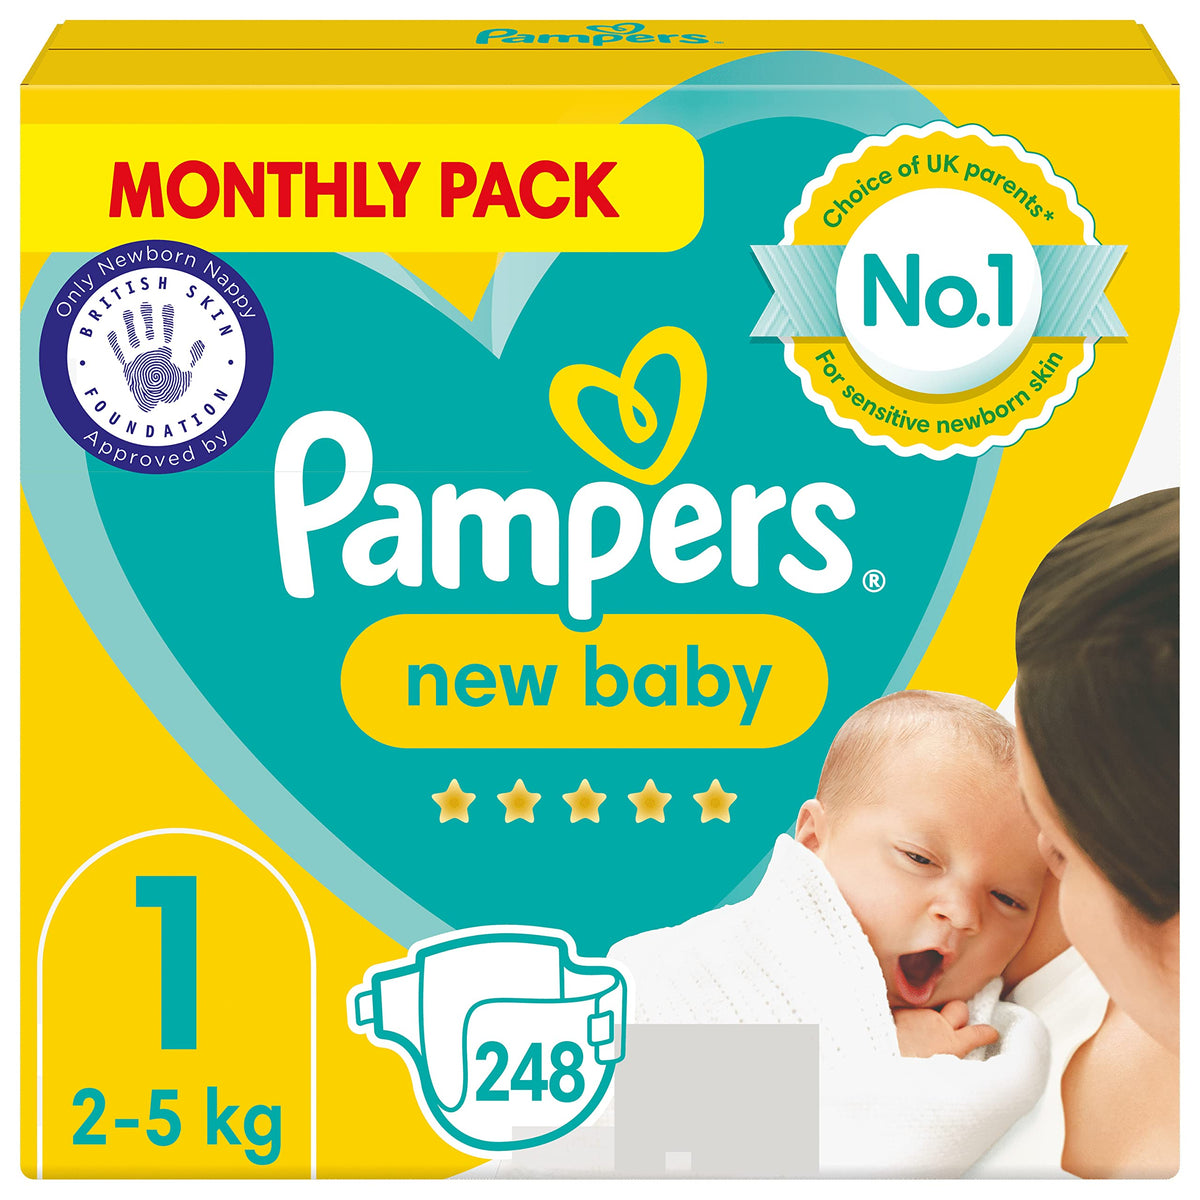 Pampers Baby Nappies Size 1 (2-5kg), New Baby, 248 Nappies, MONTHLY SAVINGS PACK, Pampers #1 Protection For Sensitive Newborn Skin